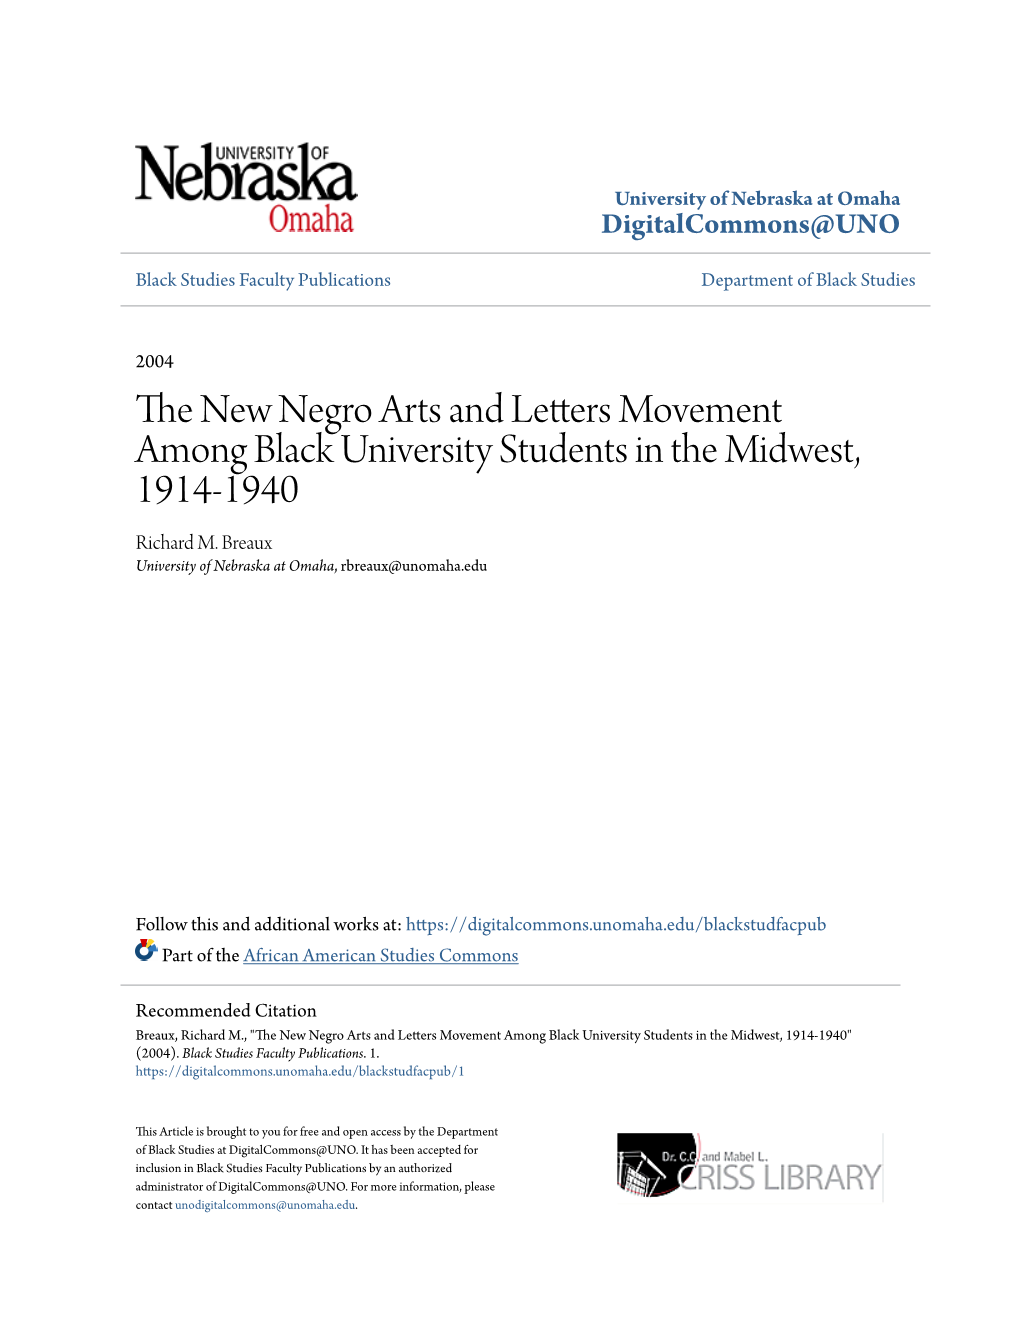 The New Negro Arts and Letters Movement Among Black University Students in the Midwest, 1914~1940